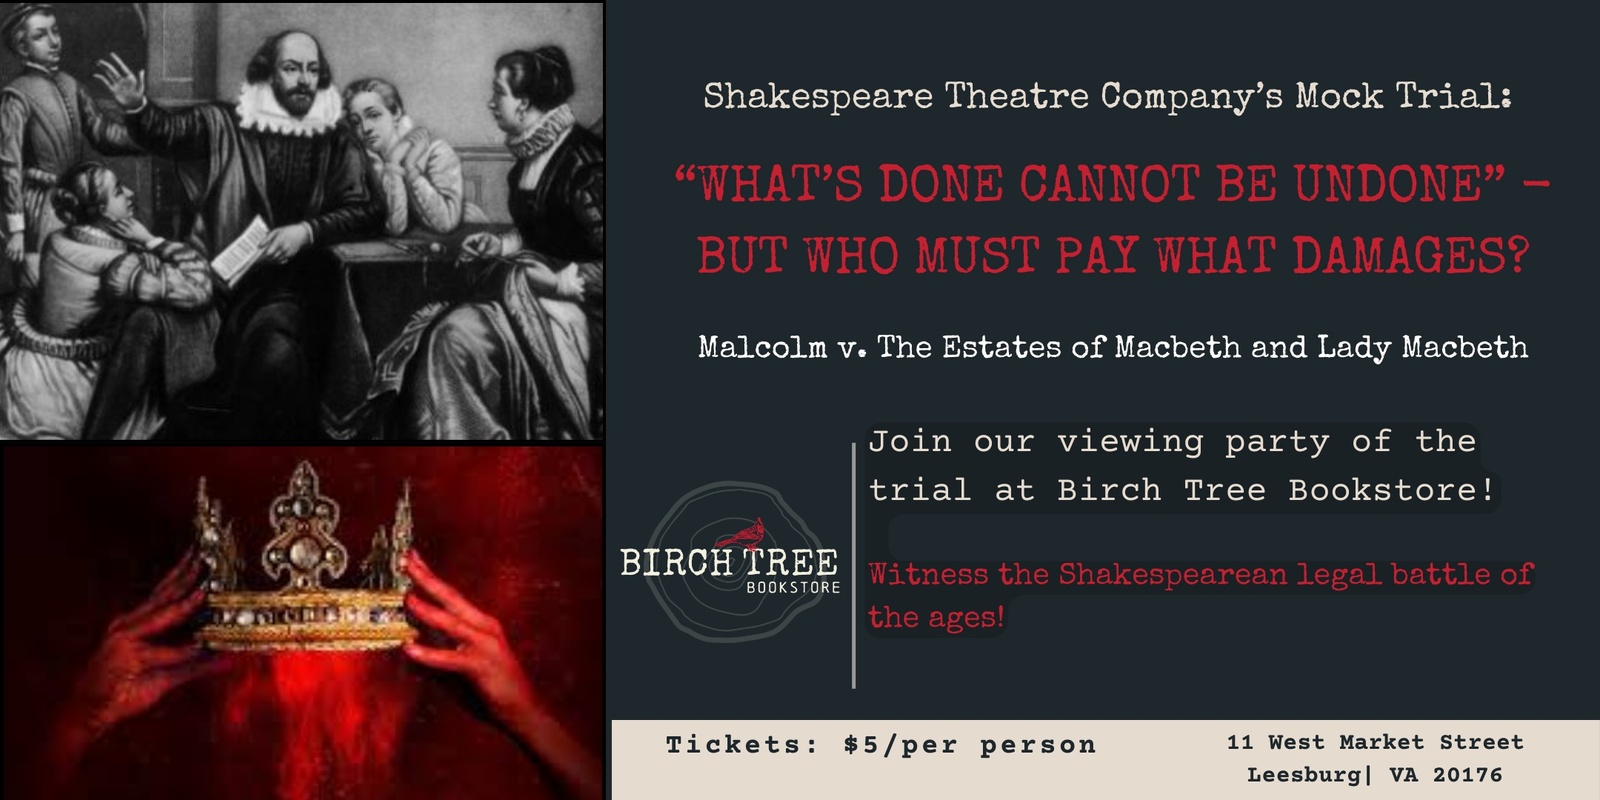 Banner image for Shakespeare Theatre Company’s Mock Trial: “WHAT’S DONE CANNOT BE UNDONE” – BUT WHO MUST PAY WHAT DAMAGES?: Malcolm v. The Estates of Macbeth and Lady Macbeth (Viewing Party)